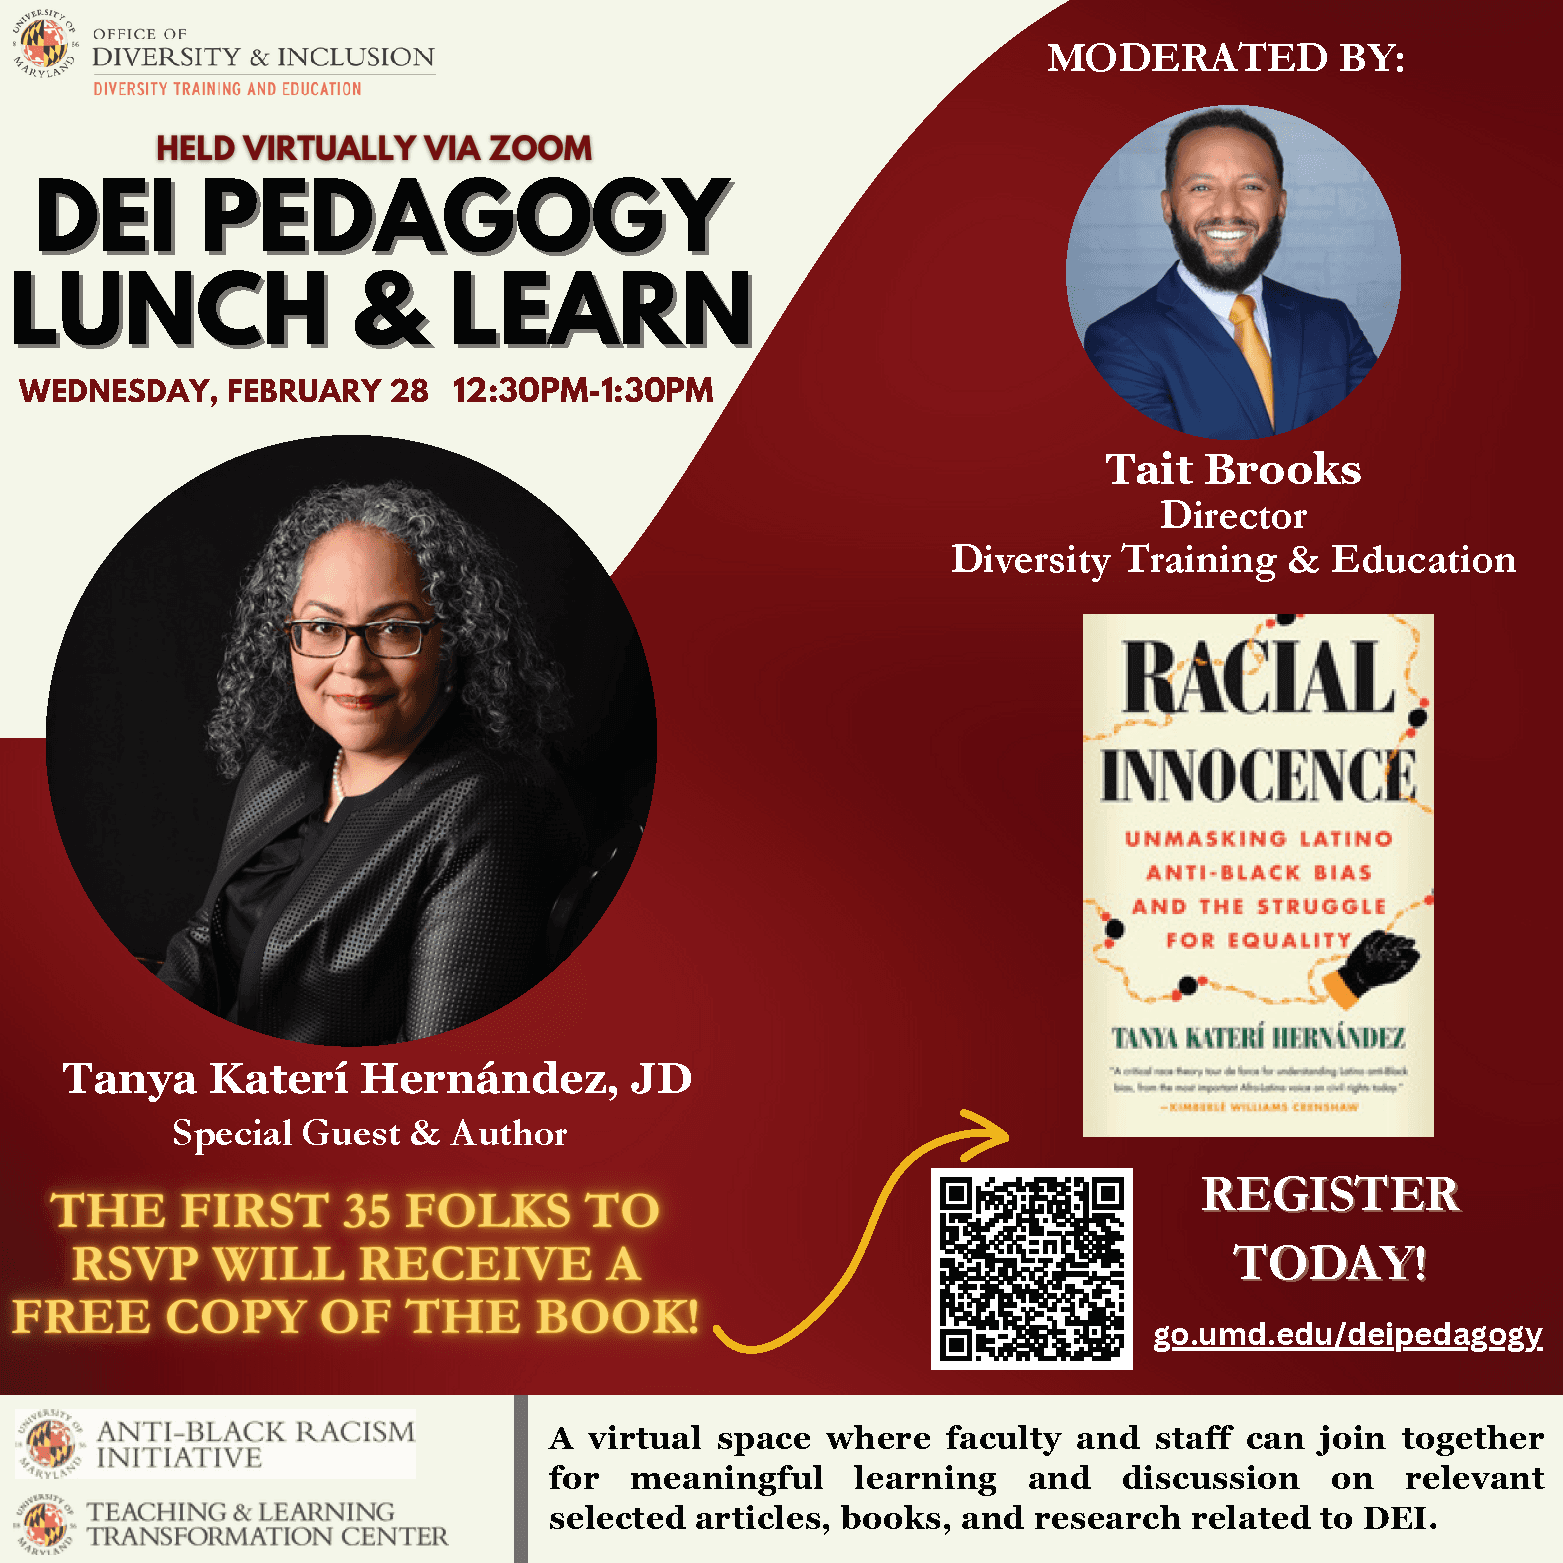 Flyer for the DEI Pedagogy Lunch & Learn with portraits of special quest author Tanya Katerí Hernández and moderator Tait Brooks